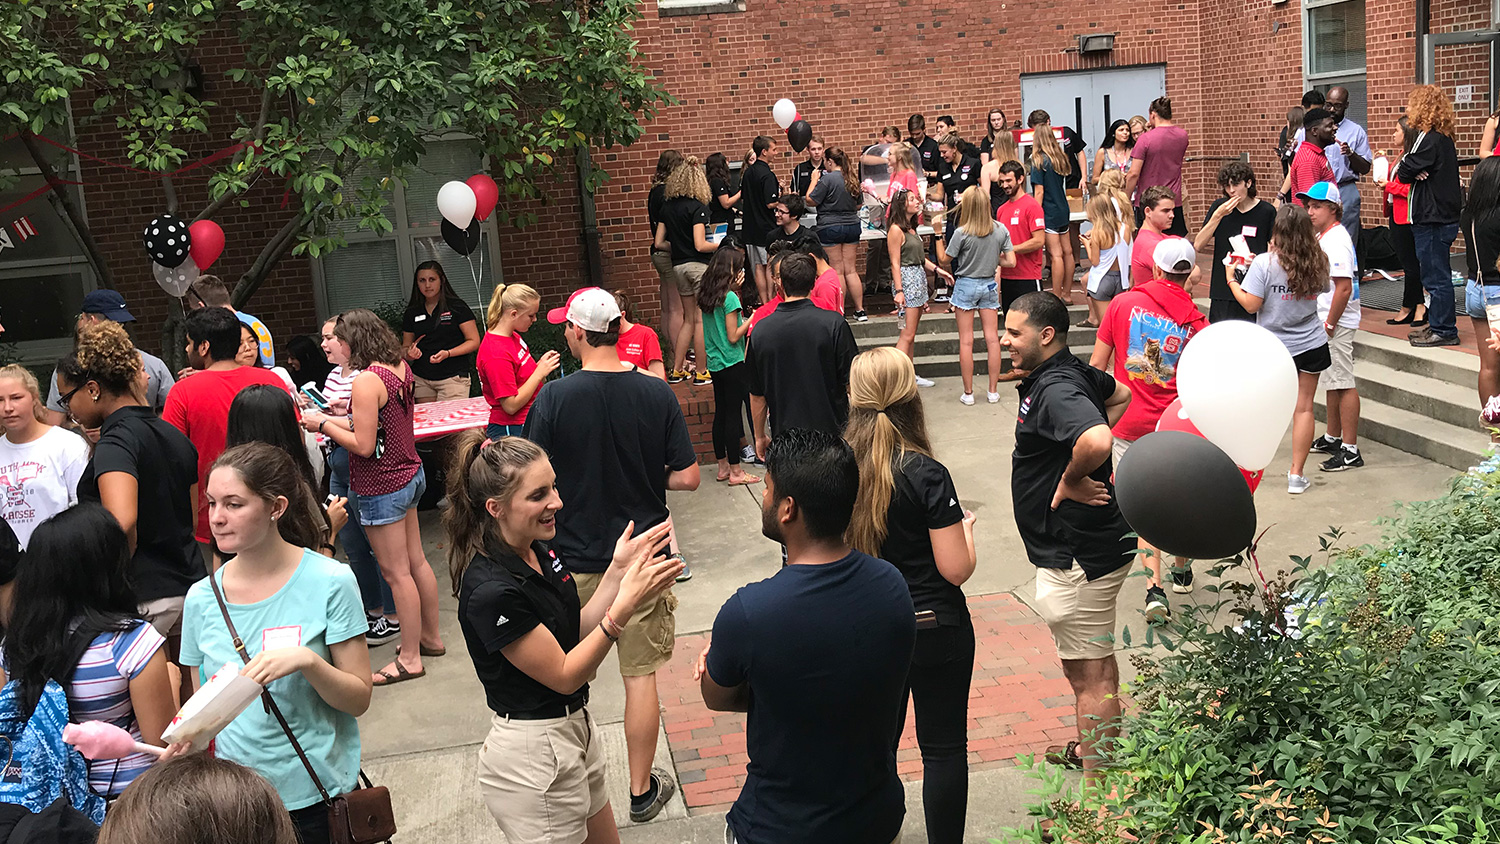 New Poole College undergraduate students were welcomed by the college's Peer Leaders in the Nelson Hall courtyard.